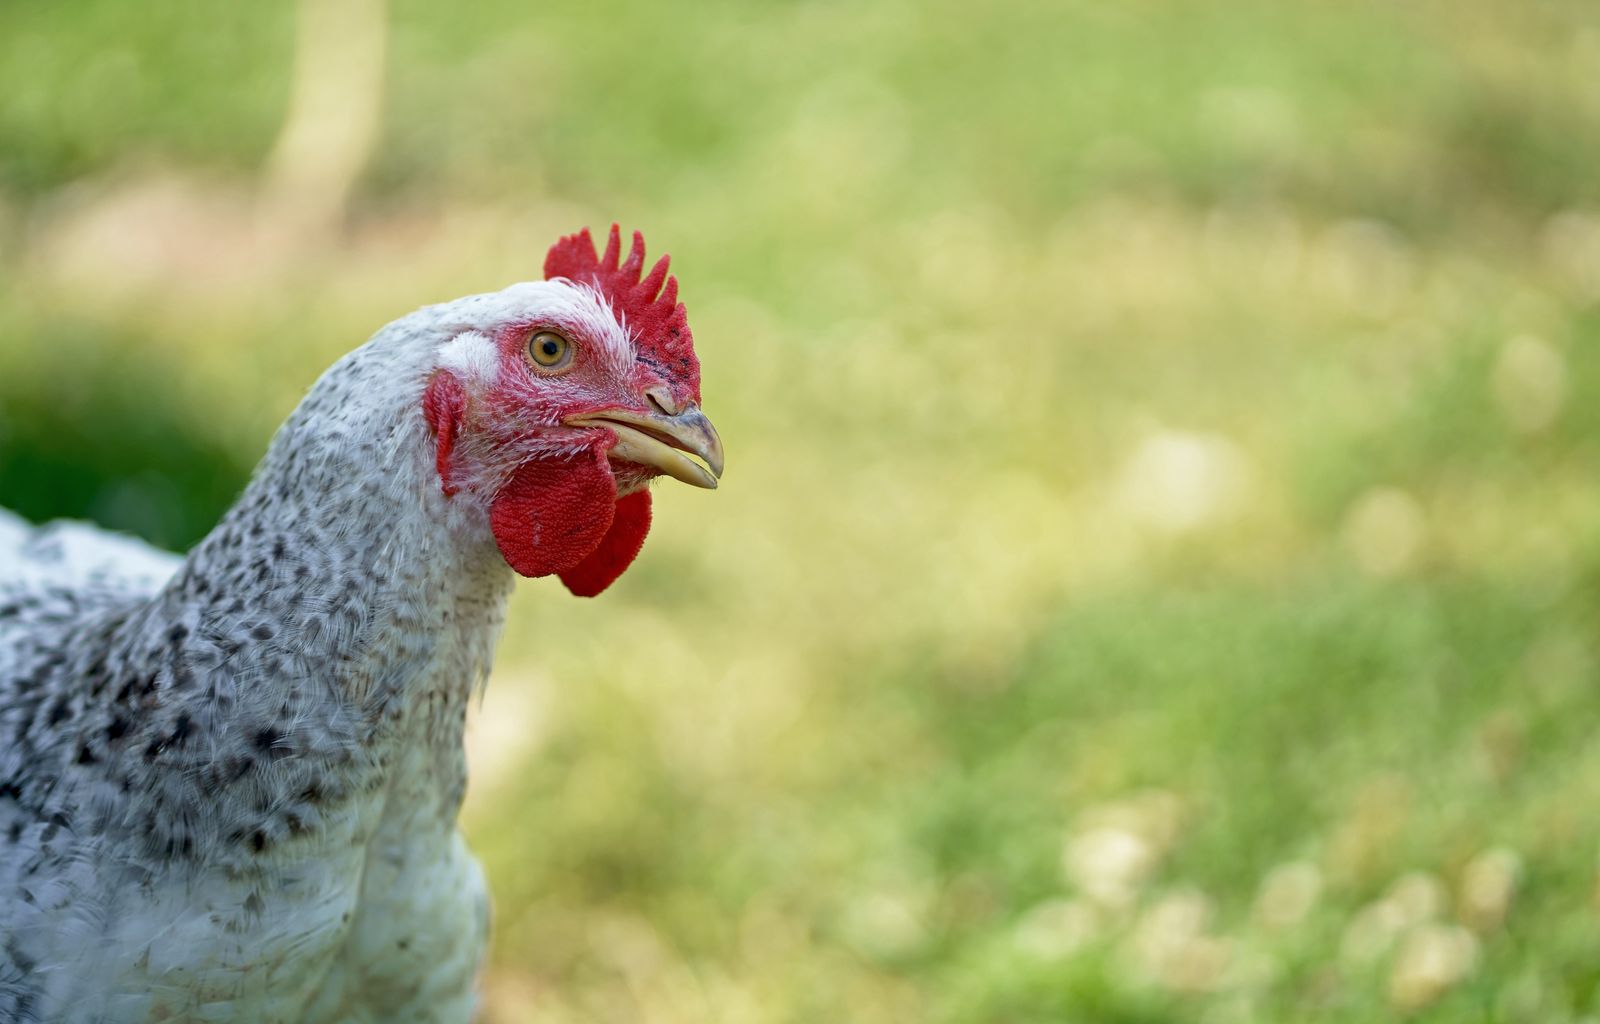 a close up of a chicken against a background of green grass.